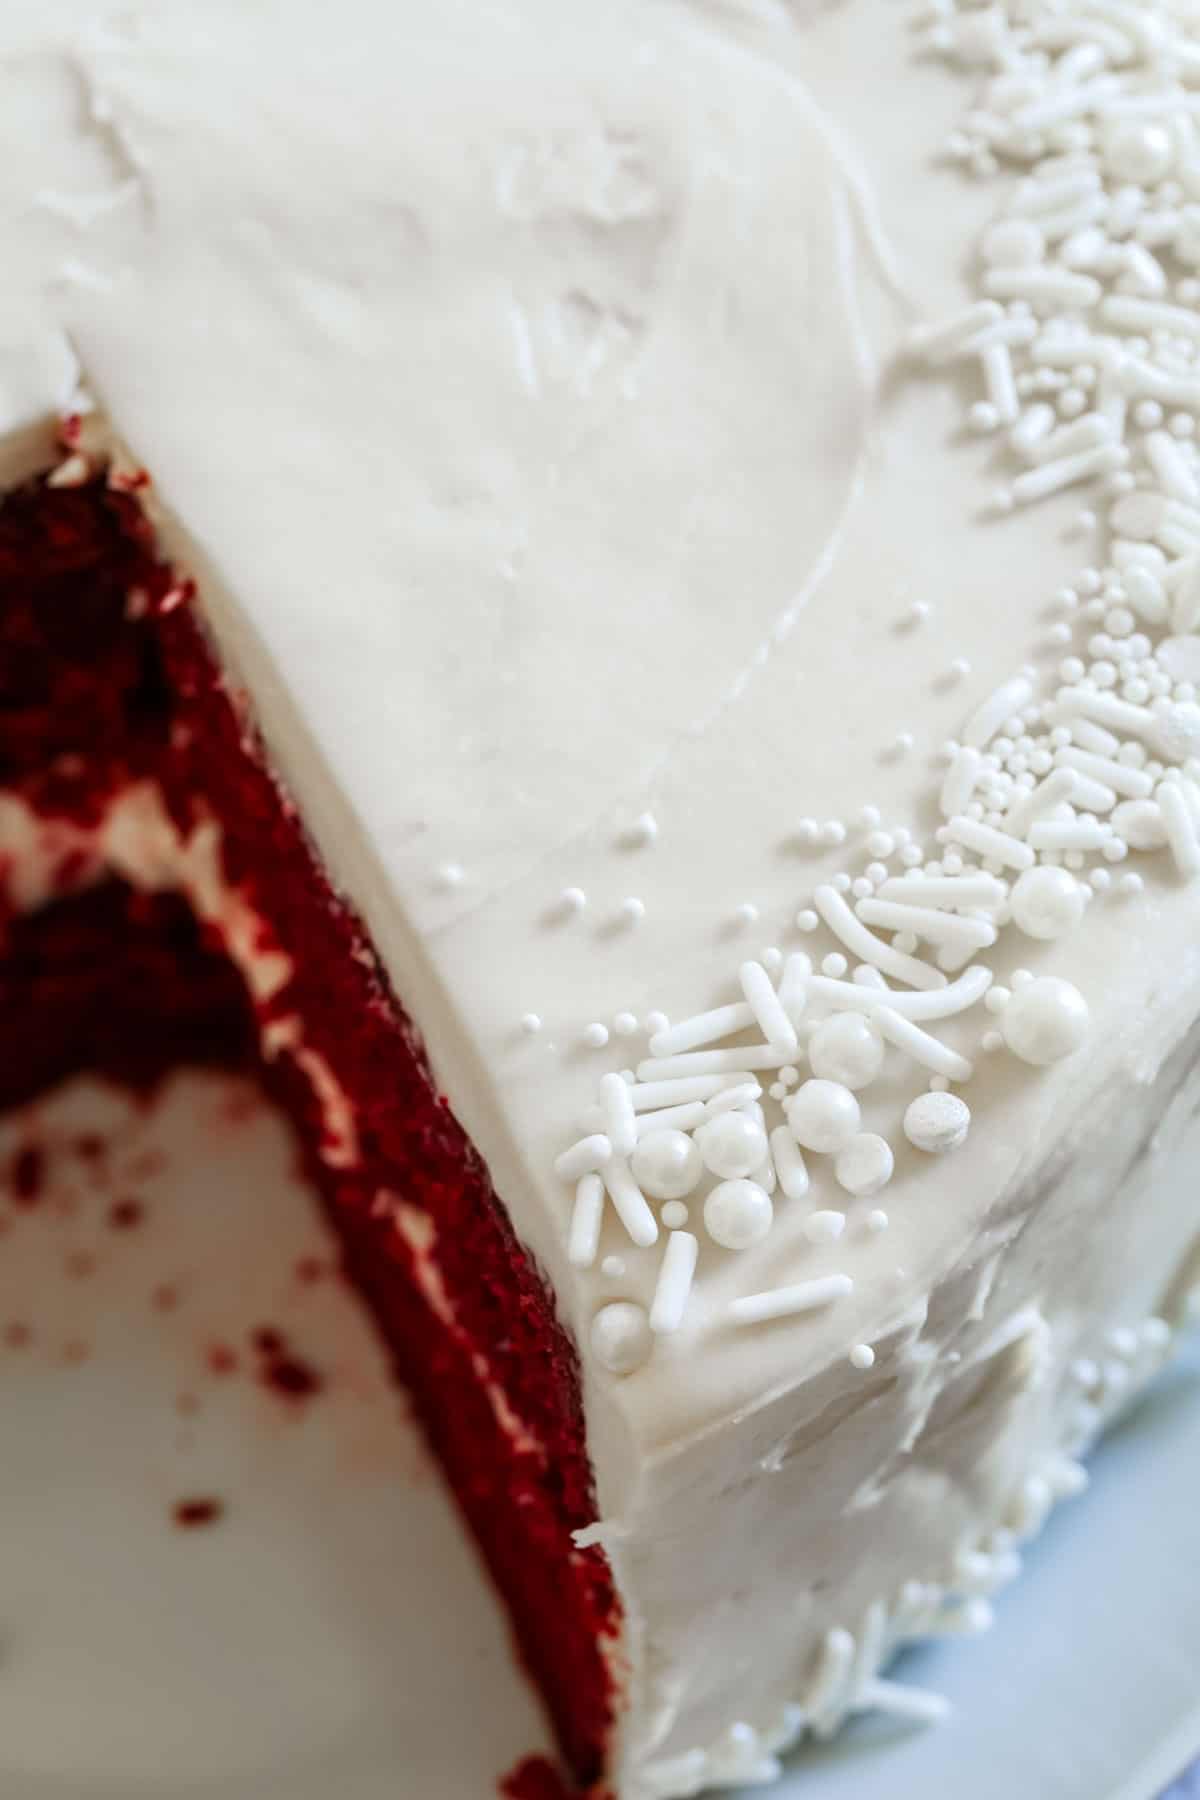 Looking down at the top of a cake with white frosting and white sprinkles with a slice removed.